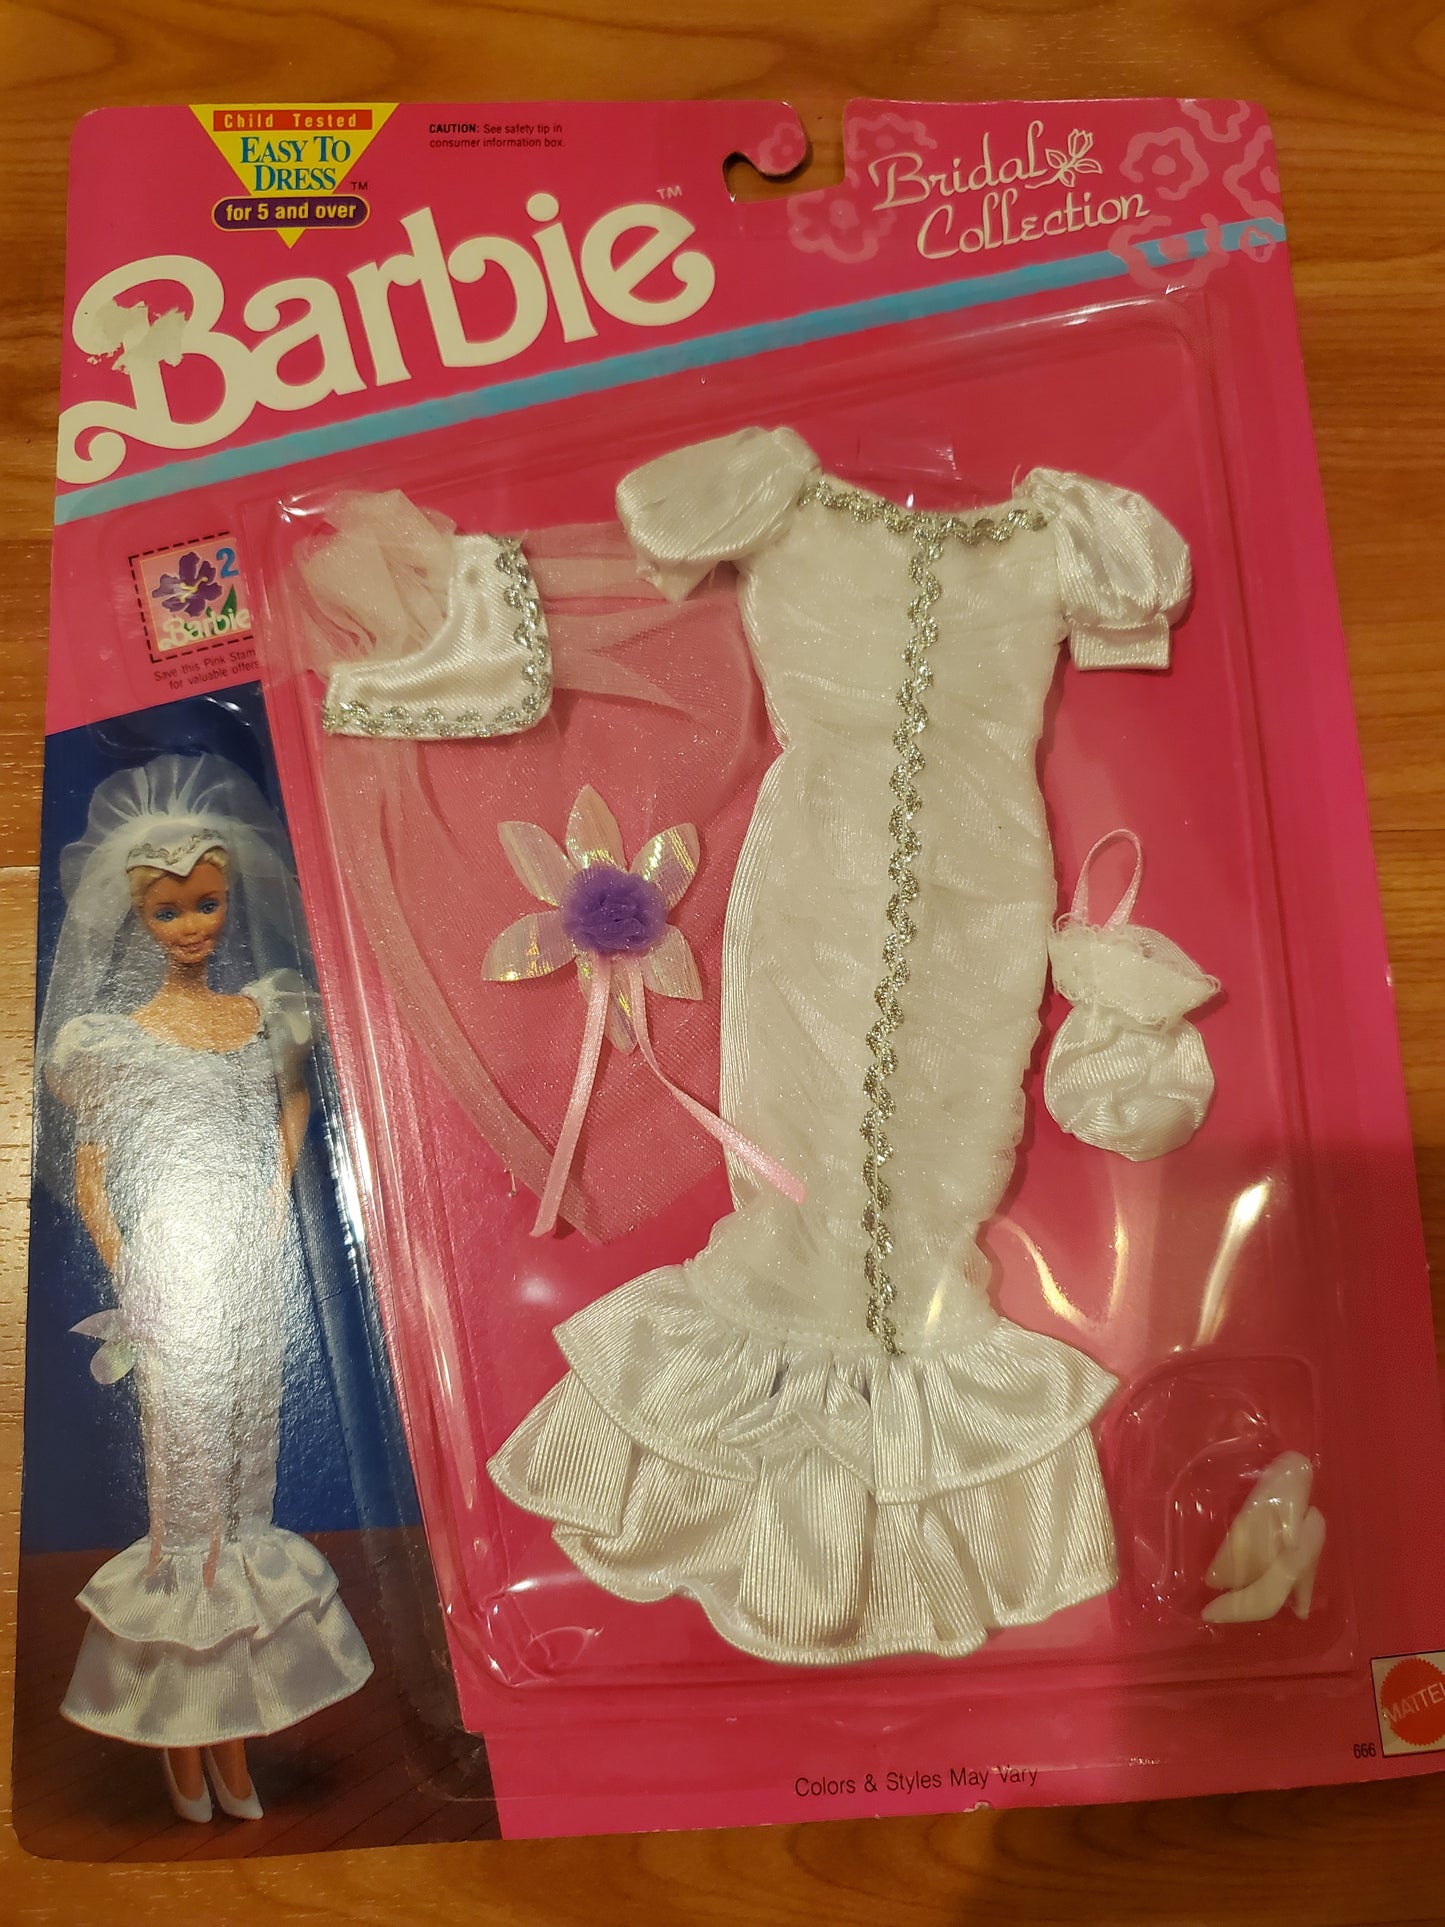 Wedding Fashion - Barbie - Easy to Dress - Mint on Card - Bridal Collection - 1991